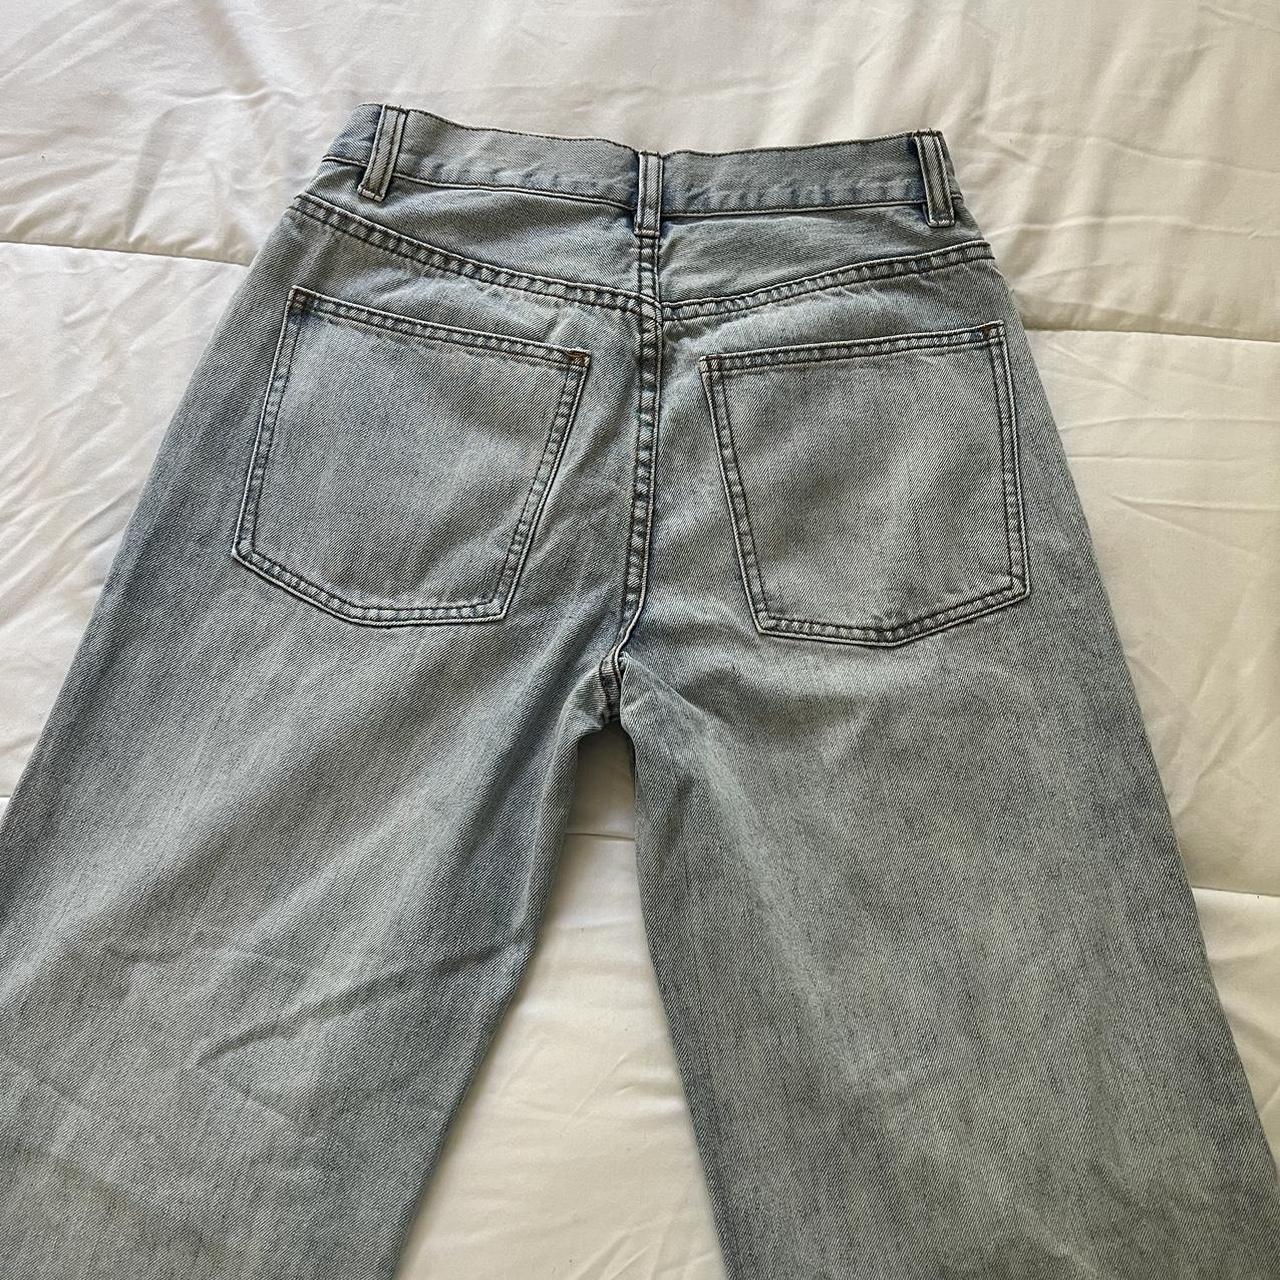 Unif jeans Size 25. Worn once great condition - Depop